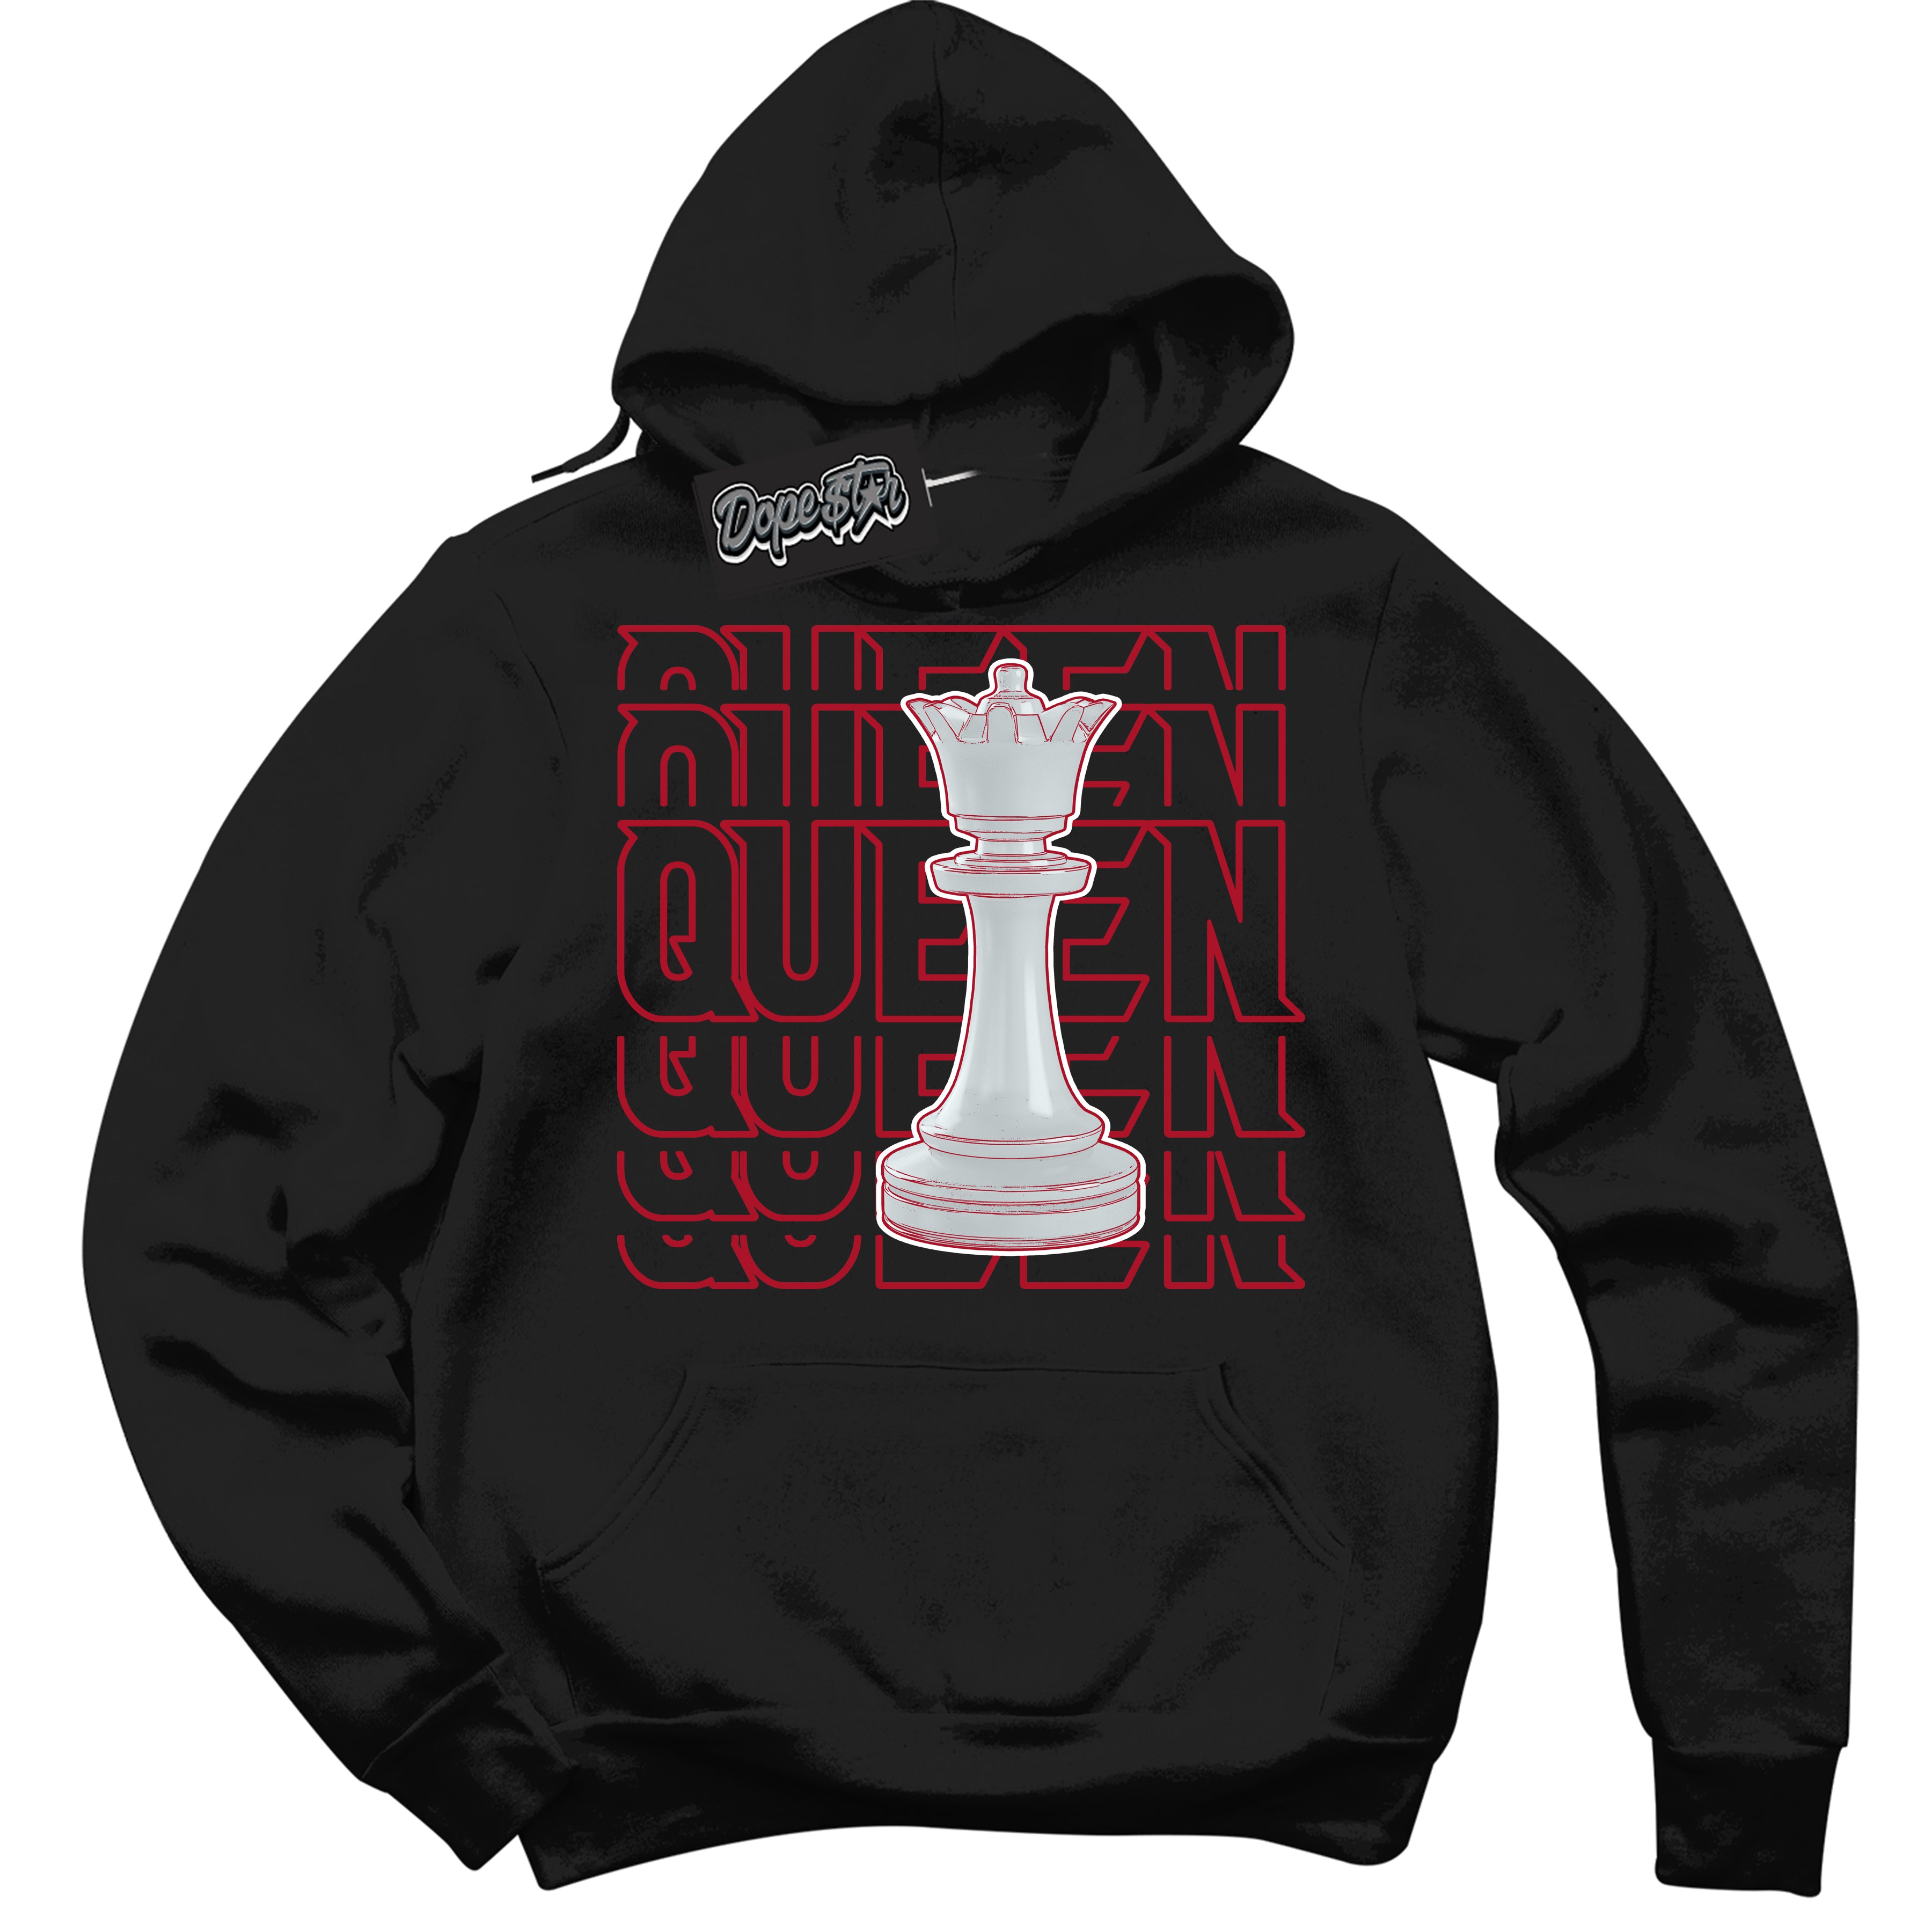 Cool Black Hoodie with “ Queen Chess ”  design that Perfectly Matches  Reverse Ultraman Sneakers.